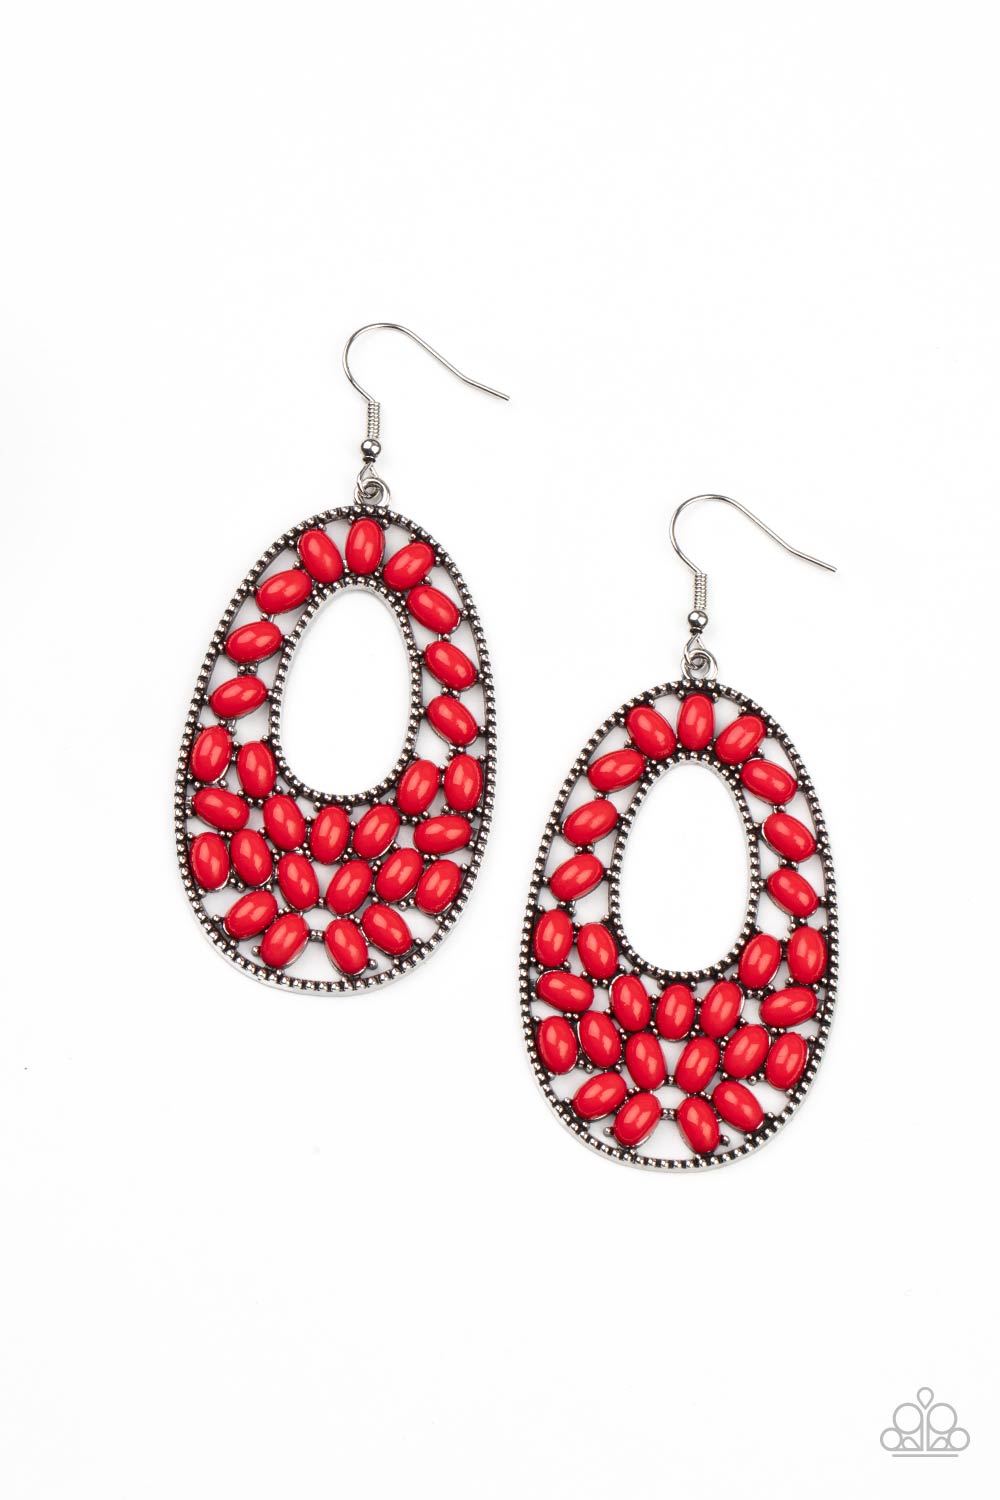 Paparazzi - Beaded Shores - Red Earrings lol